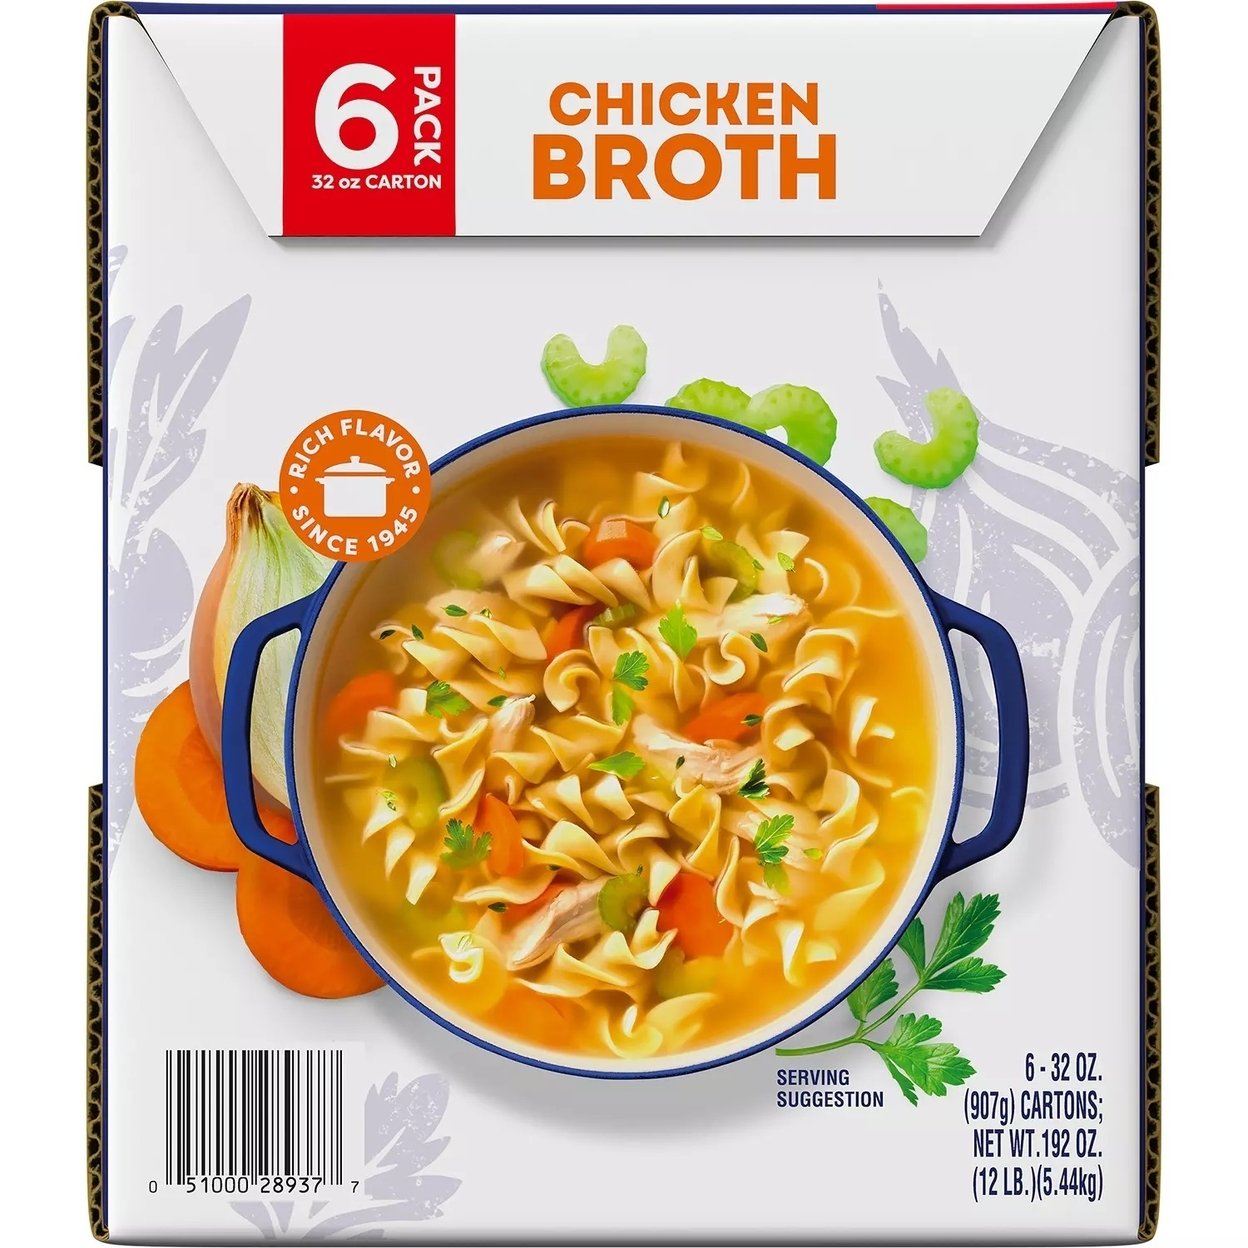 Swanson Chicken Broth, 32 Ounce (Pack Of 6)